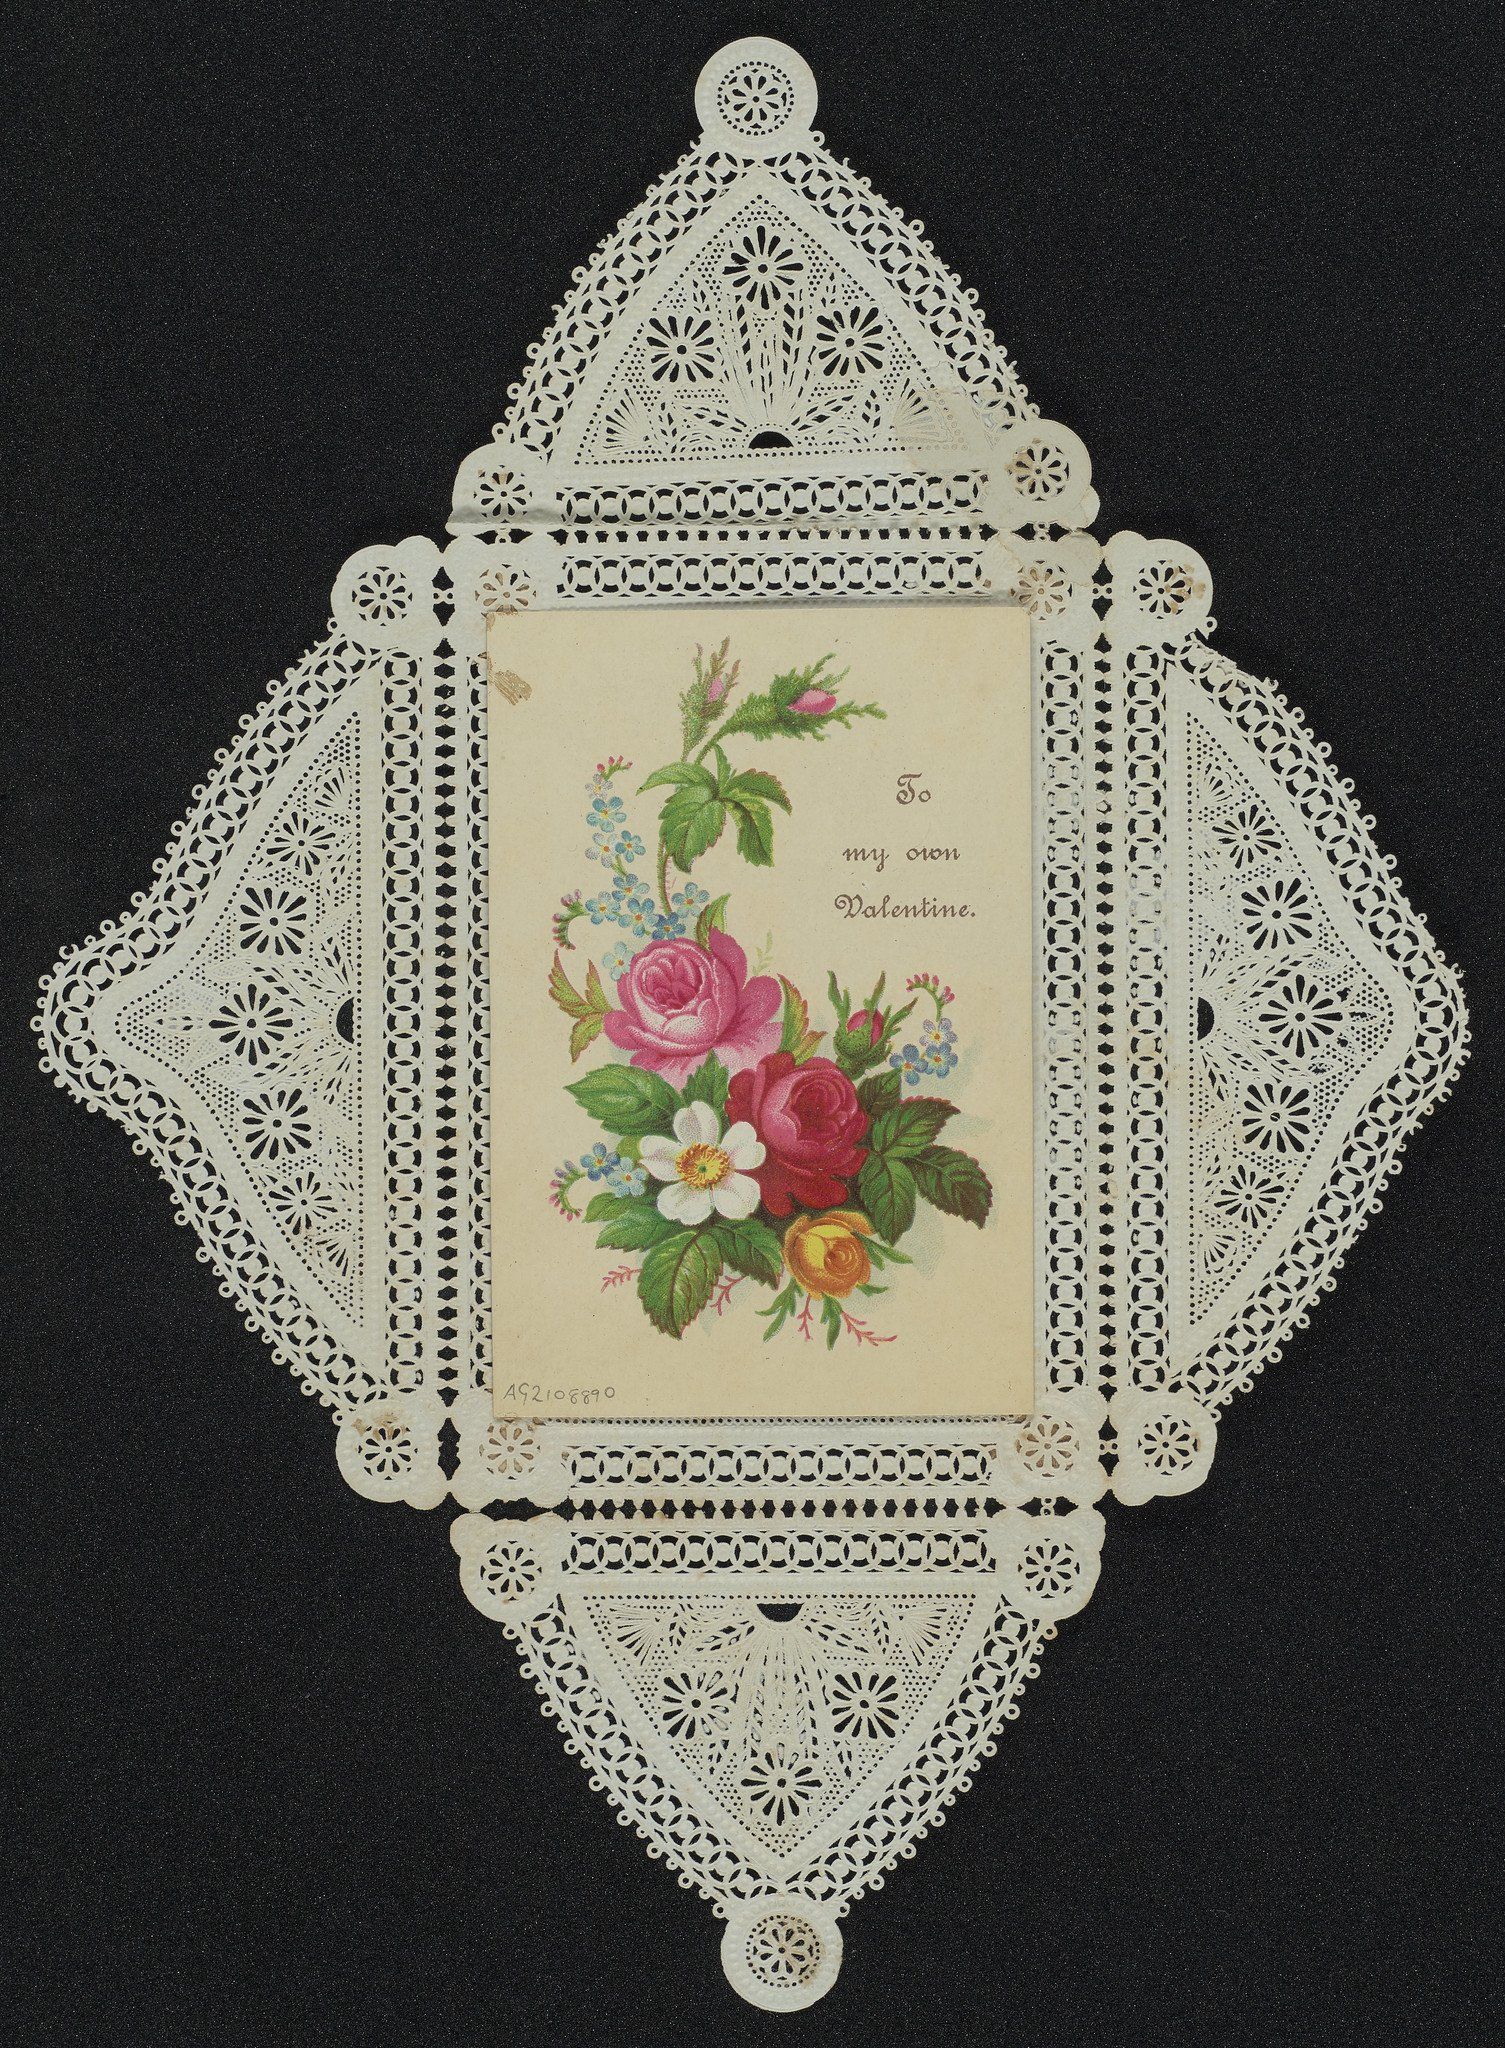 Single-sided Valentine card with printed floral design and the words 'To my own Valentine'; housed in the original lace paper envelope